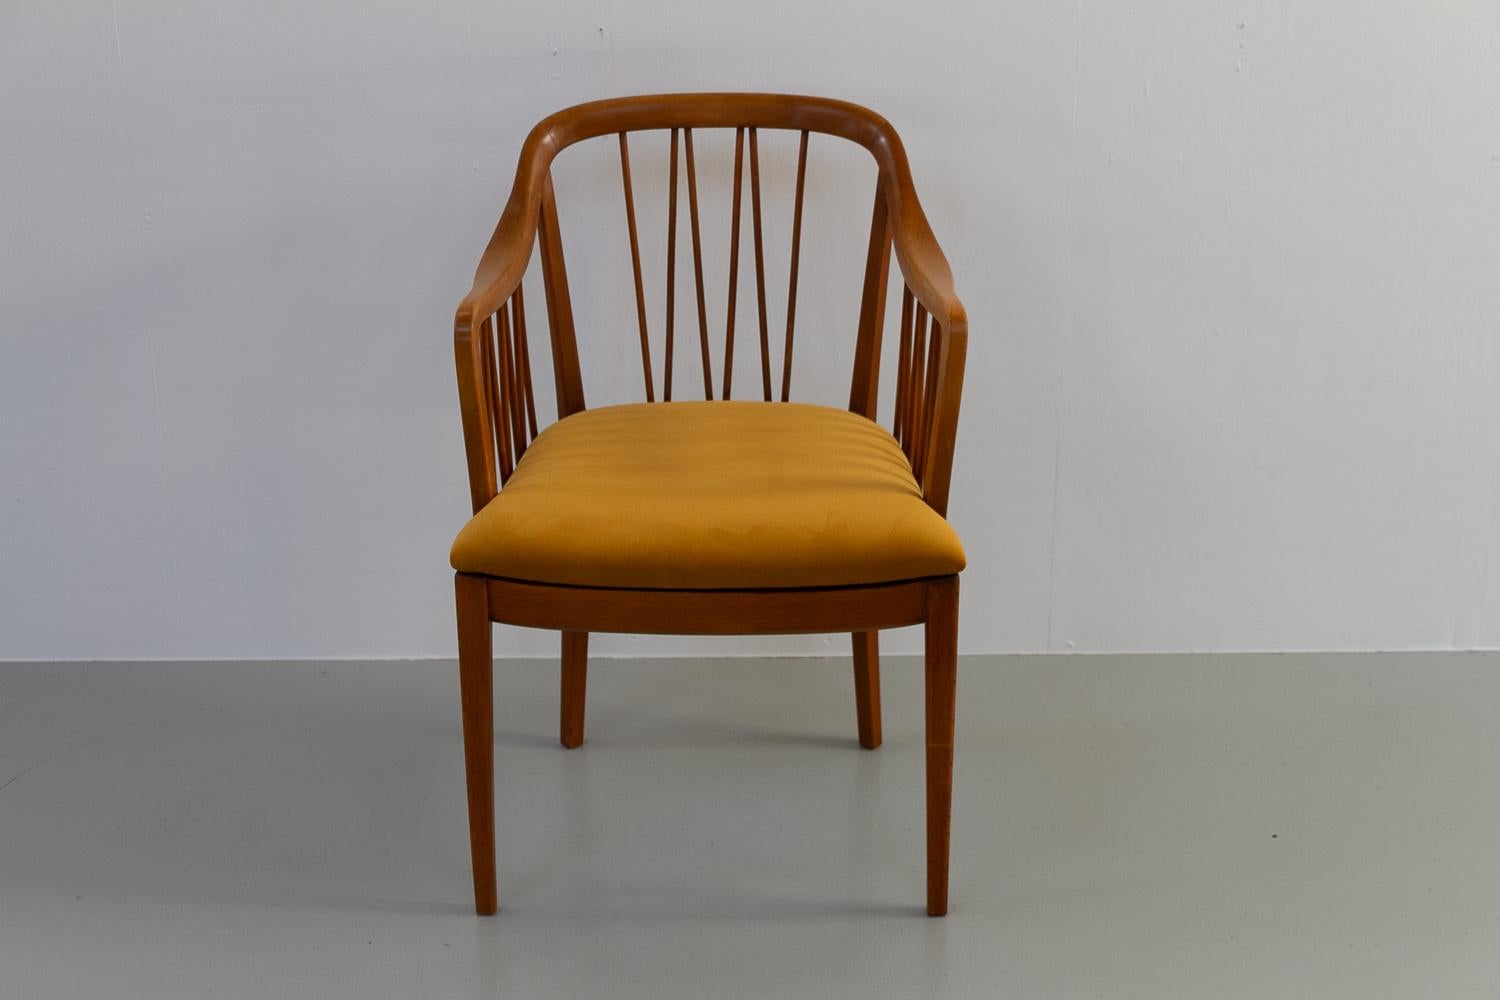 Swedish Art Deco Armchair, 1940s.

Elegant Scandinavian Art Deco armchair in stained and lacquered beech with curved backrest. Seat is newly upholstered with golden velvet fabric.
Made in Sweden by unknown manufacturer but shows some similarities to